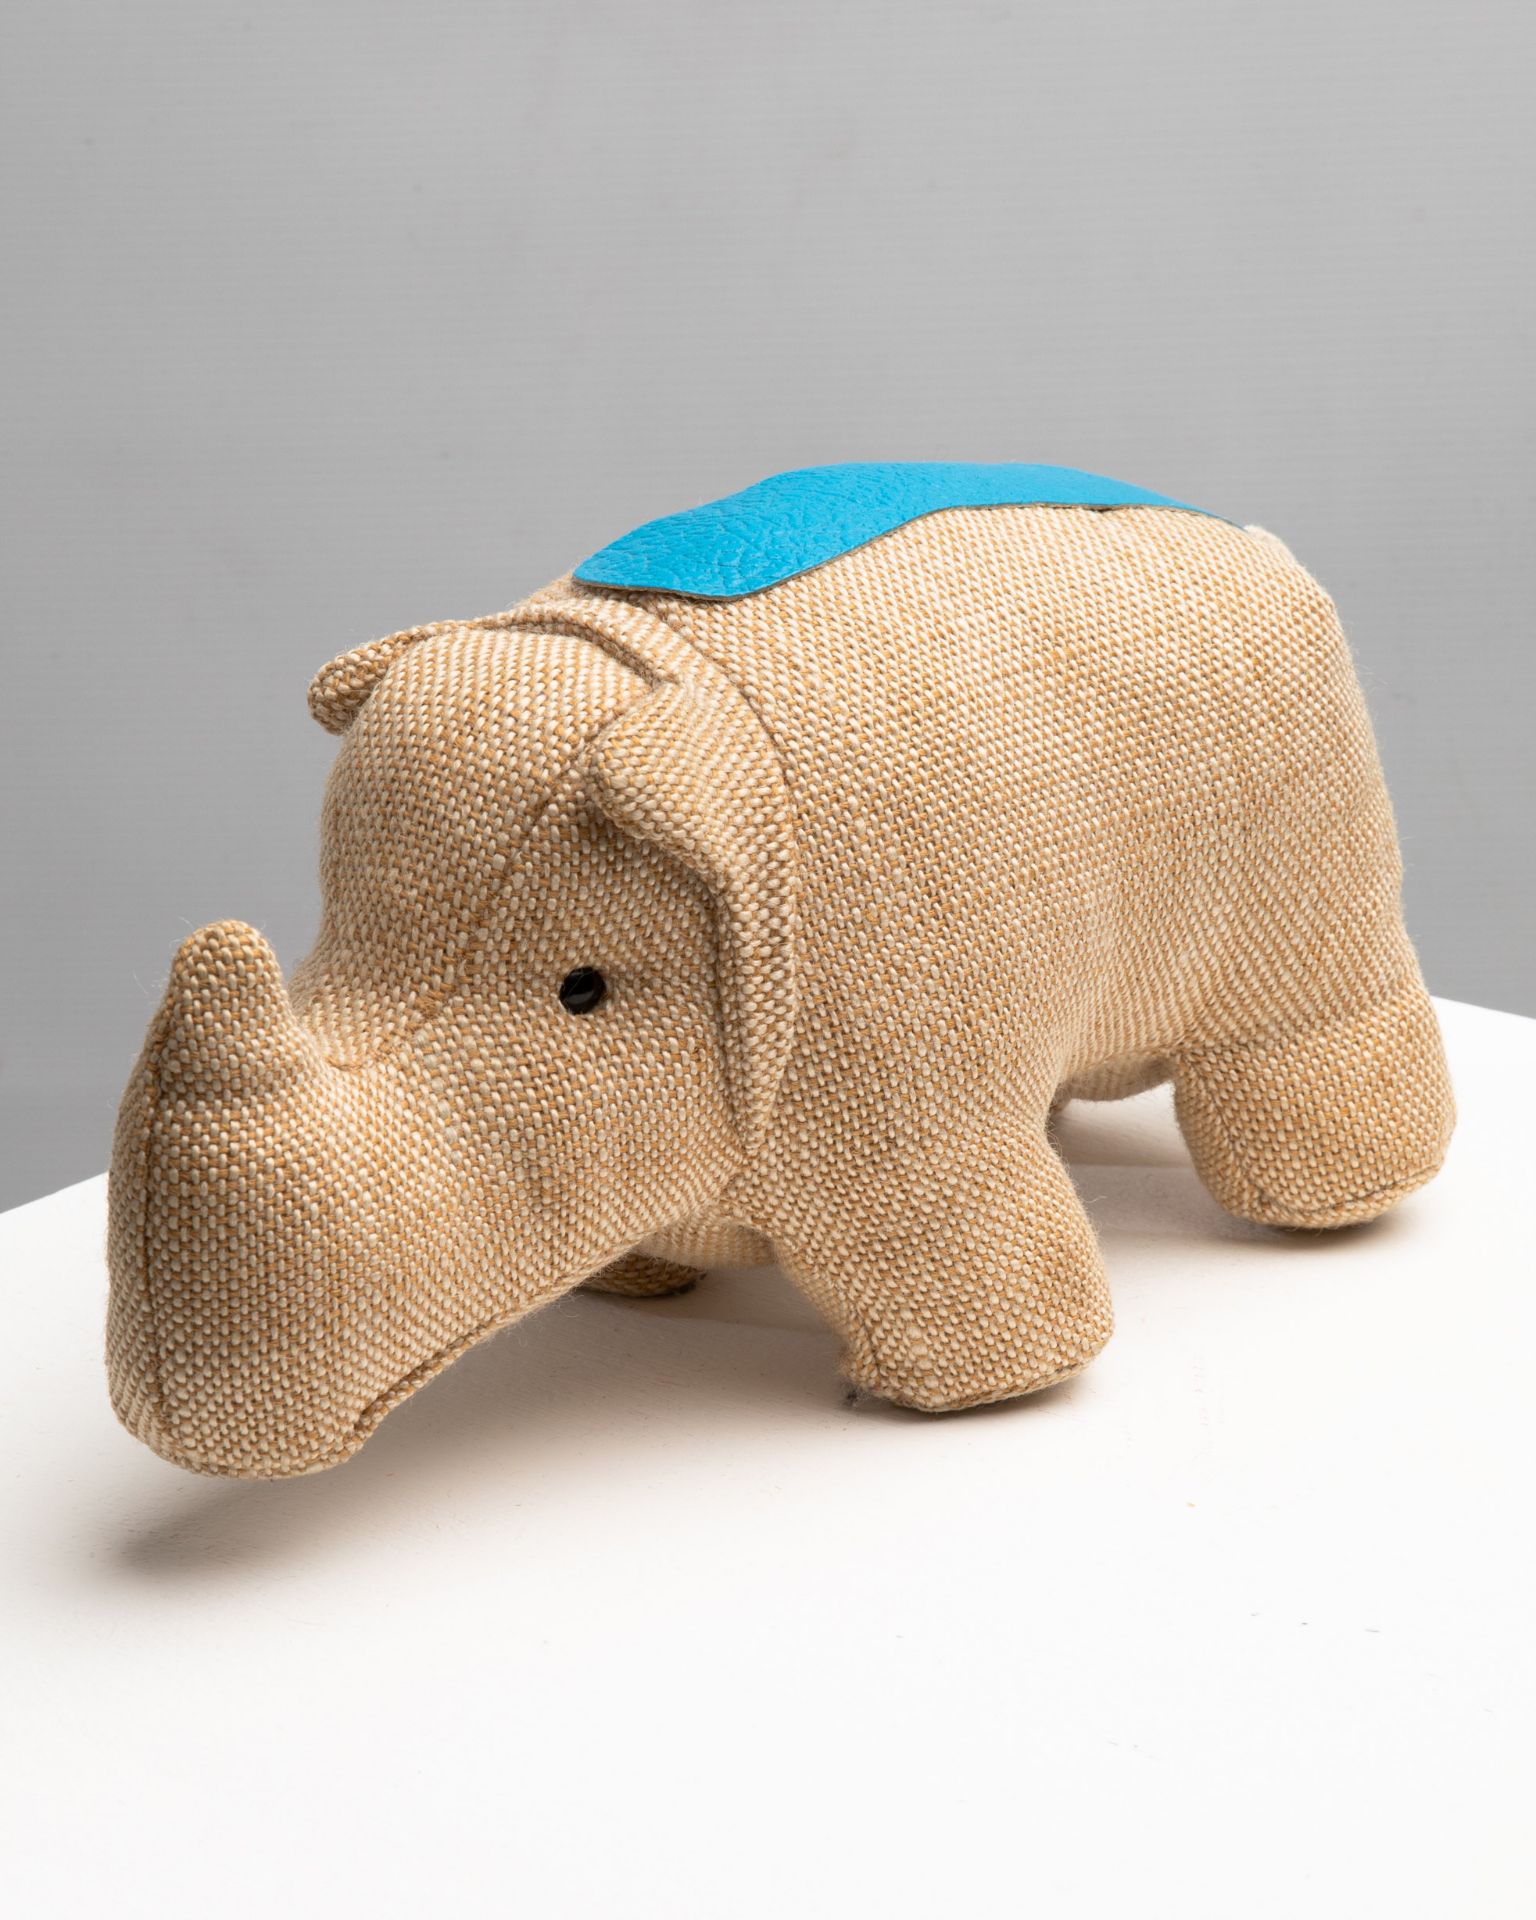 Renate Müller, Therapeutic Toy Rhinoceros